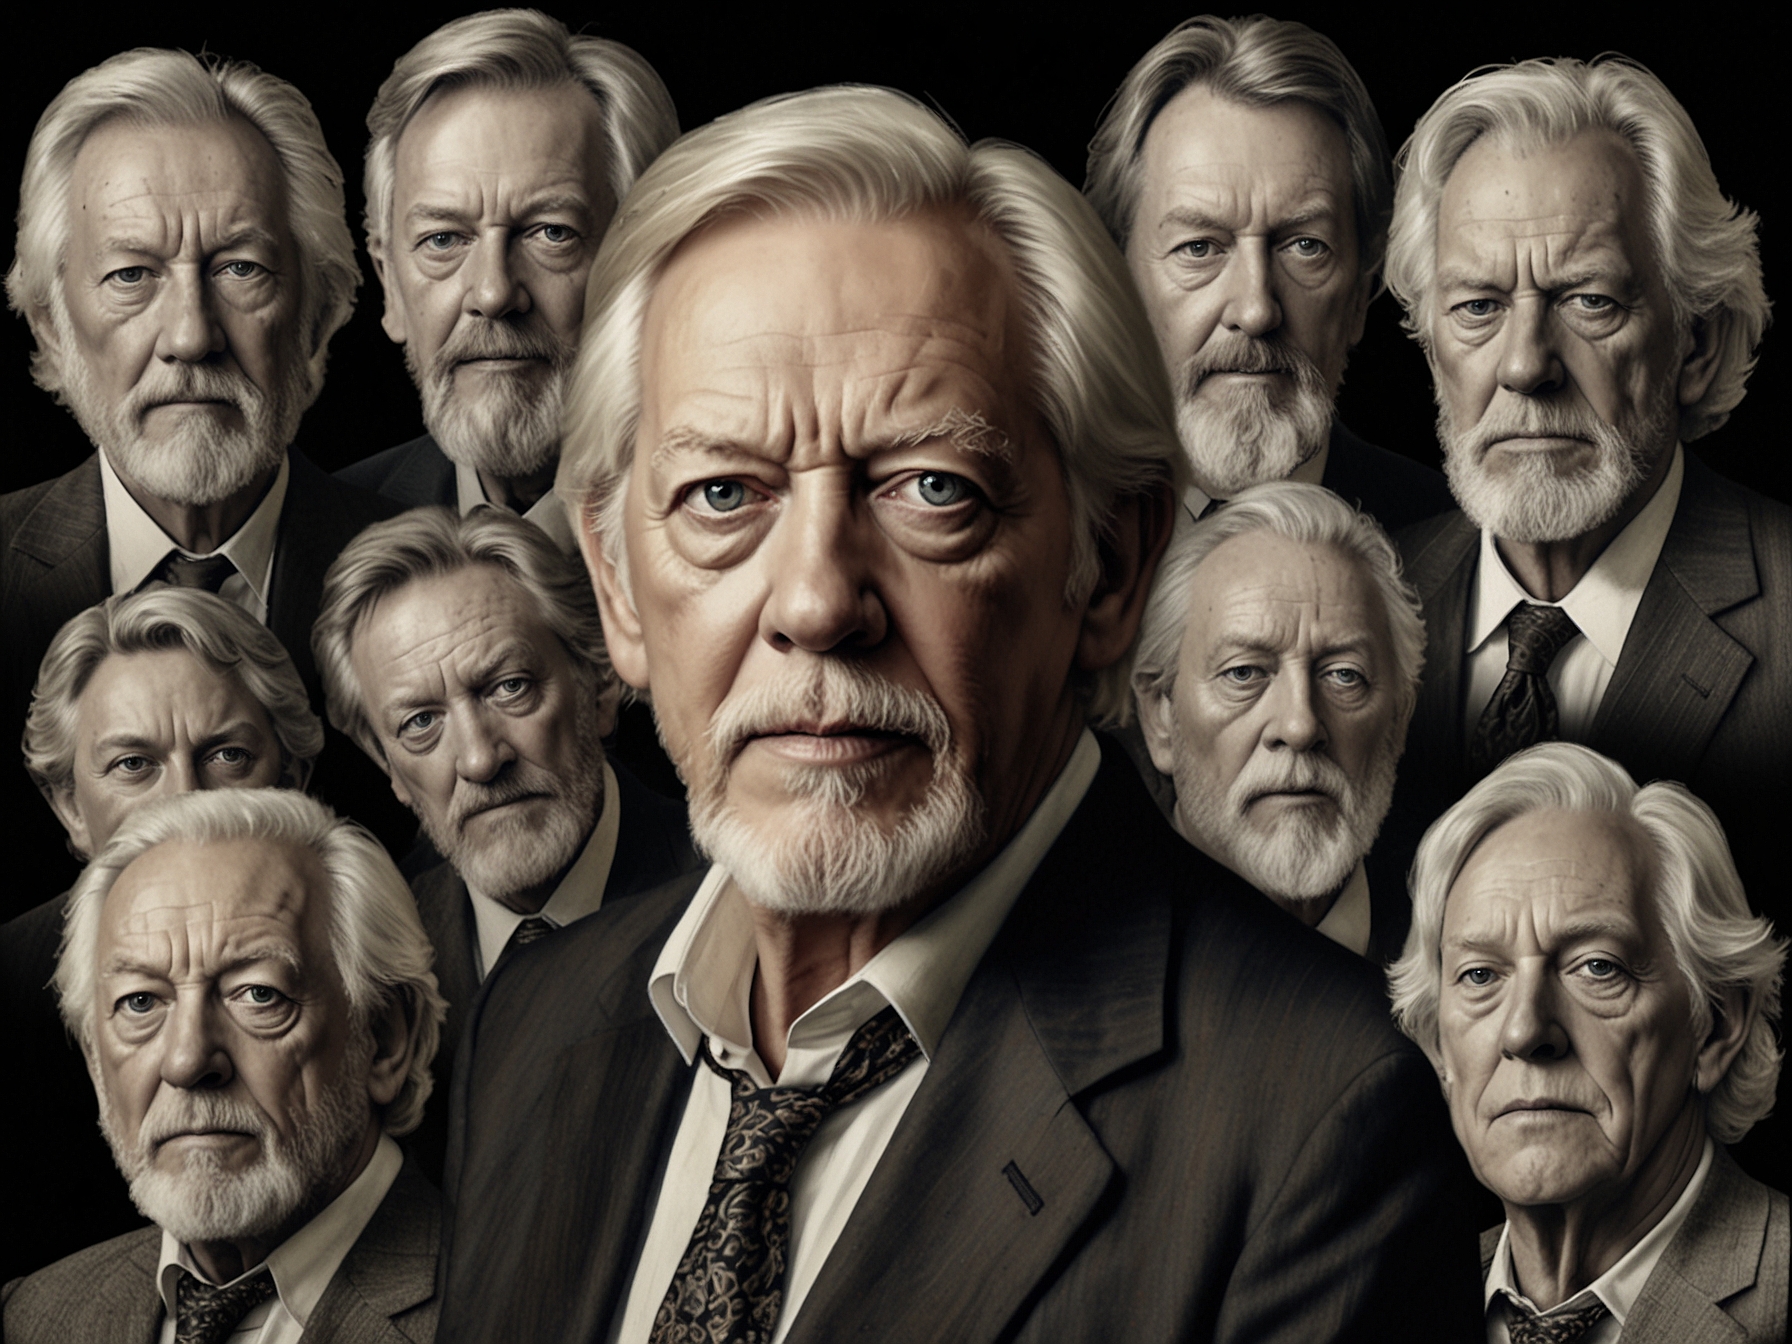 A collage of some of Donald Sutherland's most iconic film roles, illustrating his remarkable versatility and longevity in the entertainment industry.